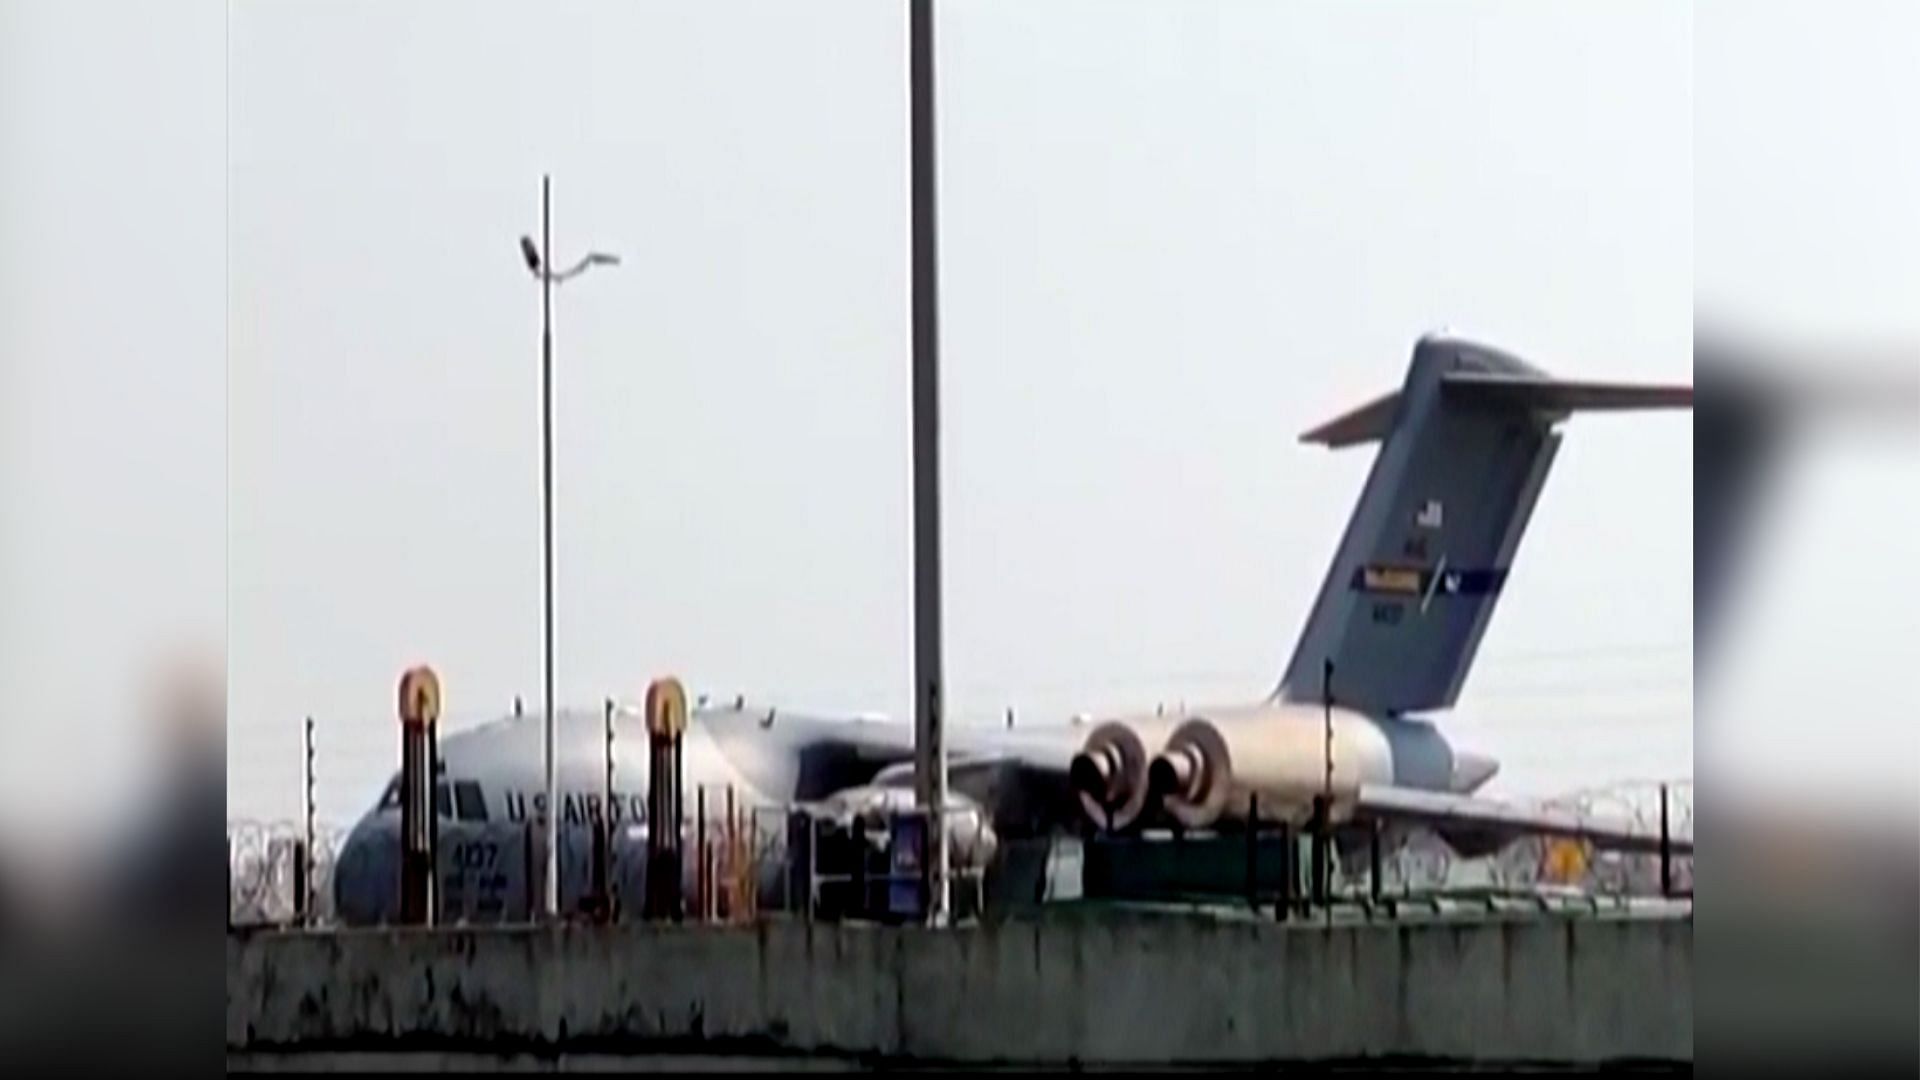 The USAF plane at the Ahmedabad International Airport.